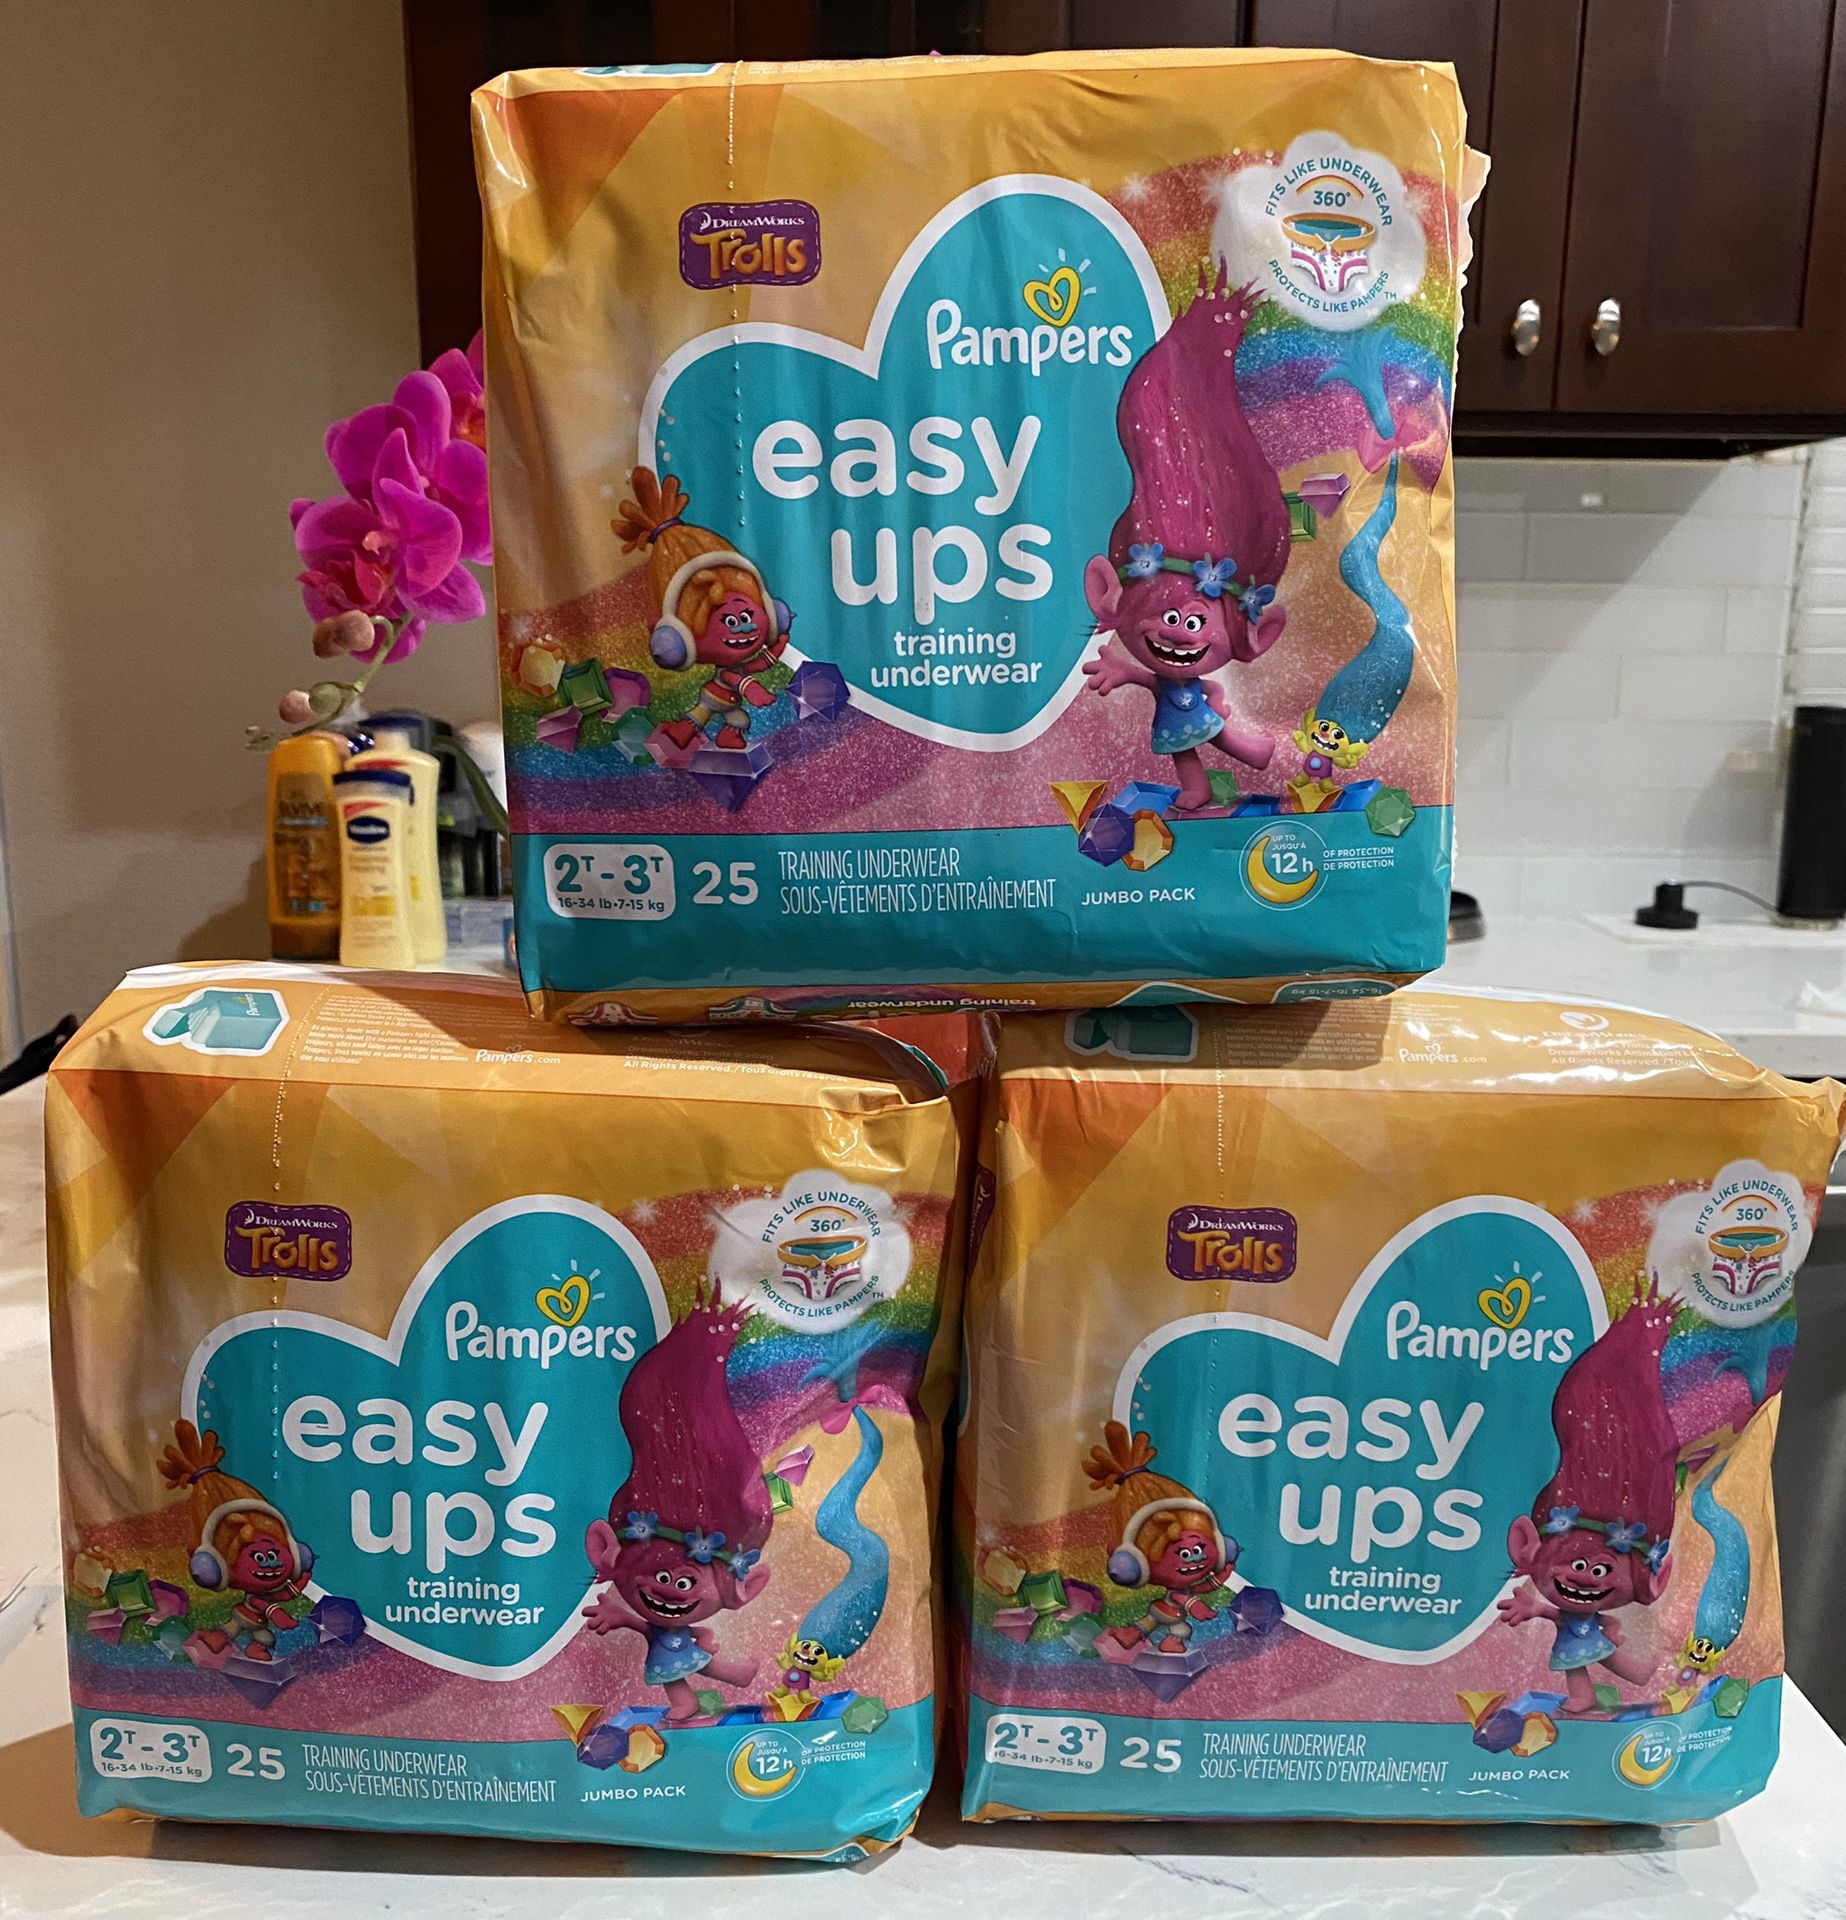 Pampers Easy Ups Training Underwear for Girls, Size 4 2T-3T - 25 ct